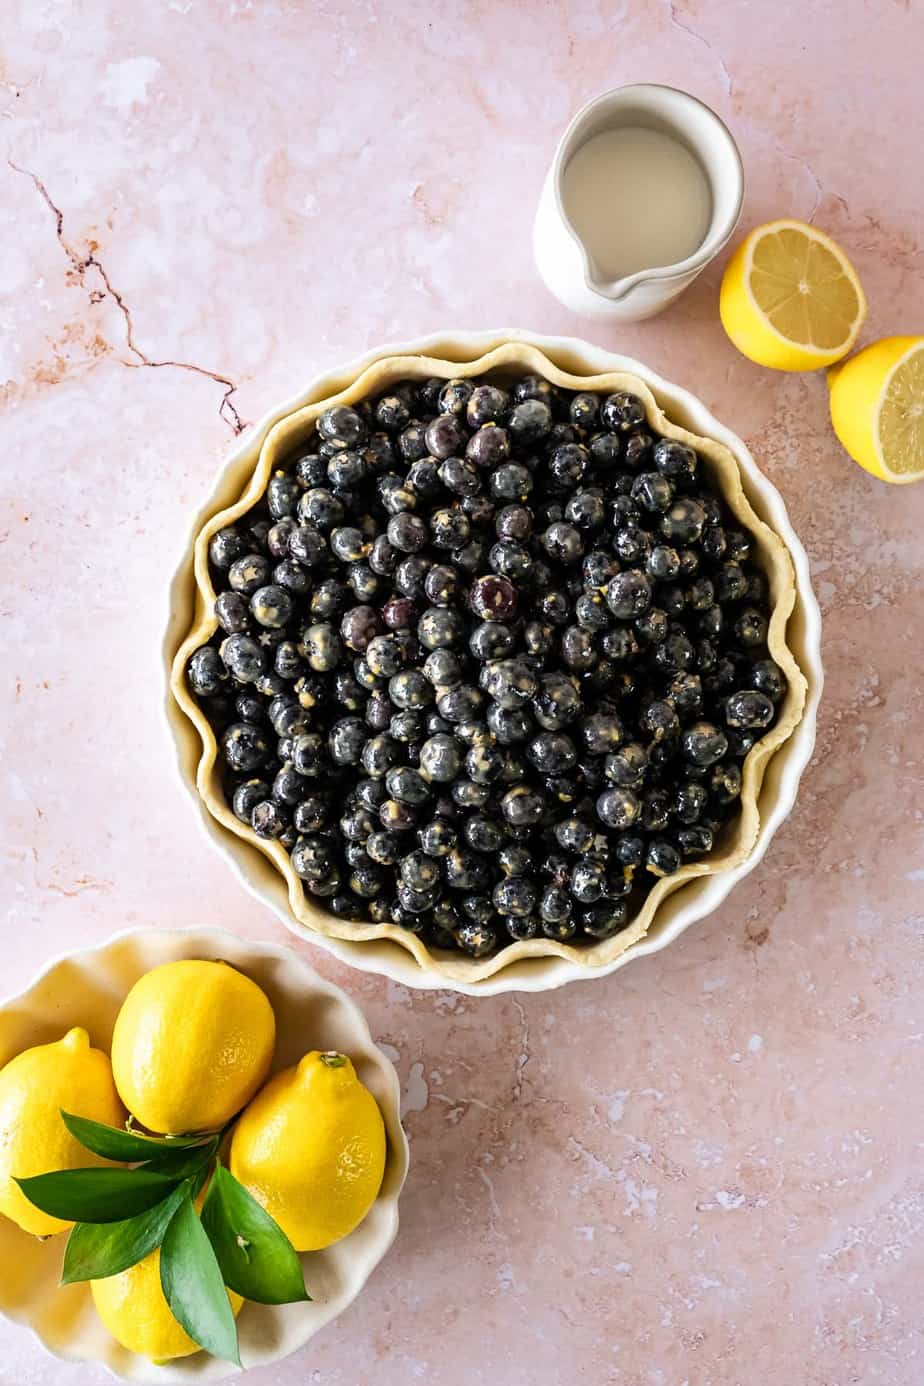 A pie filled with blueberries